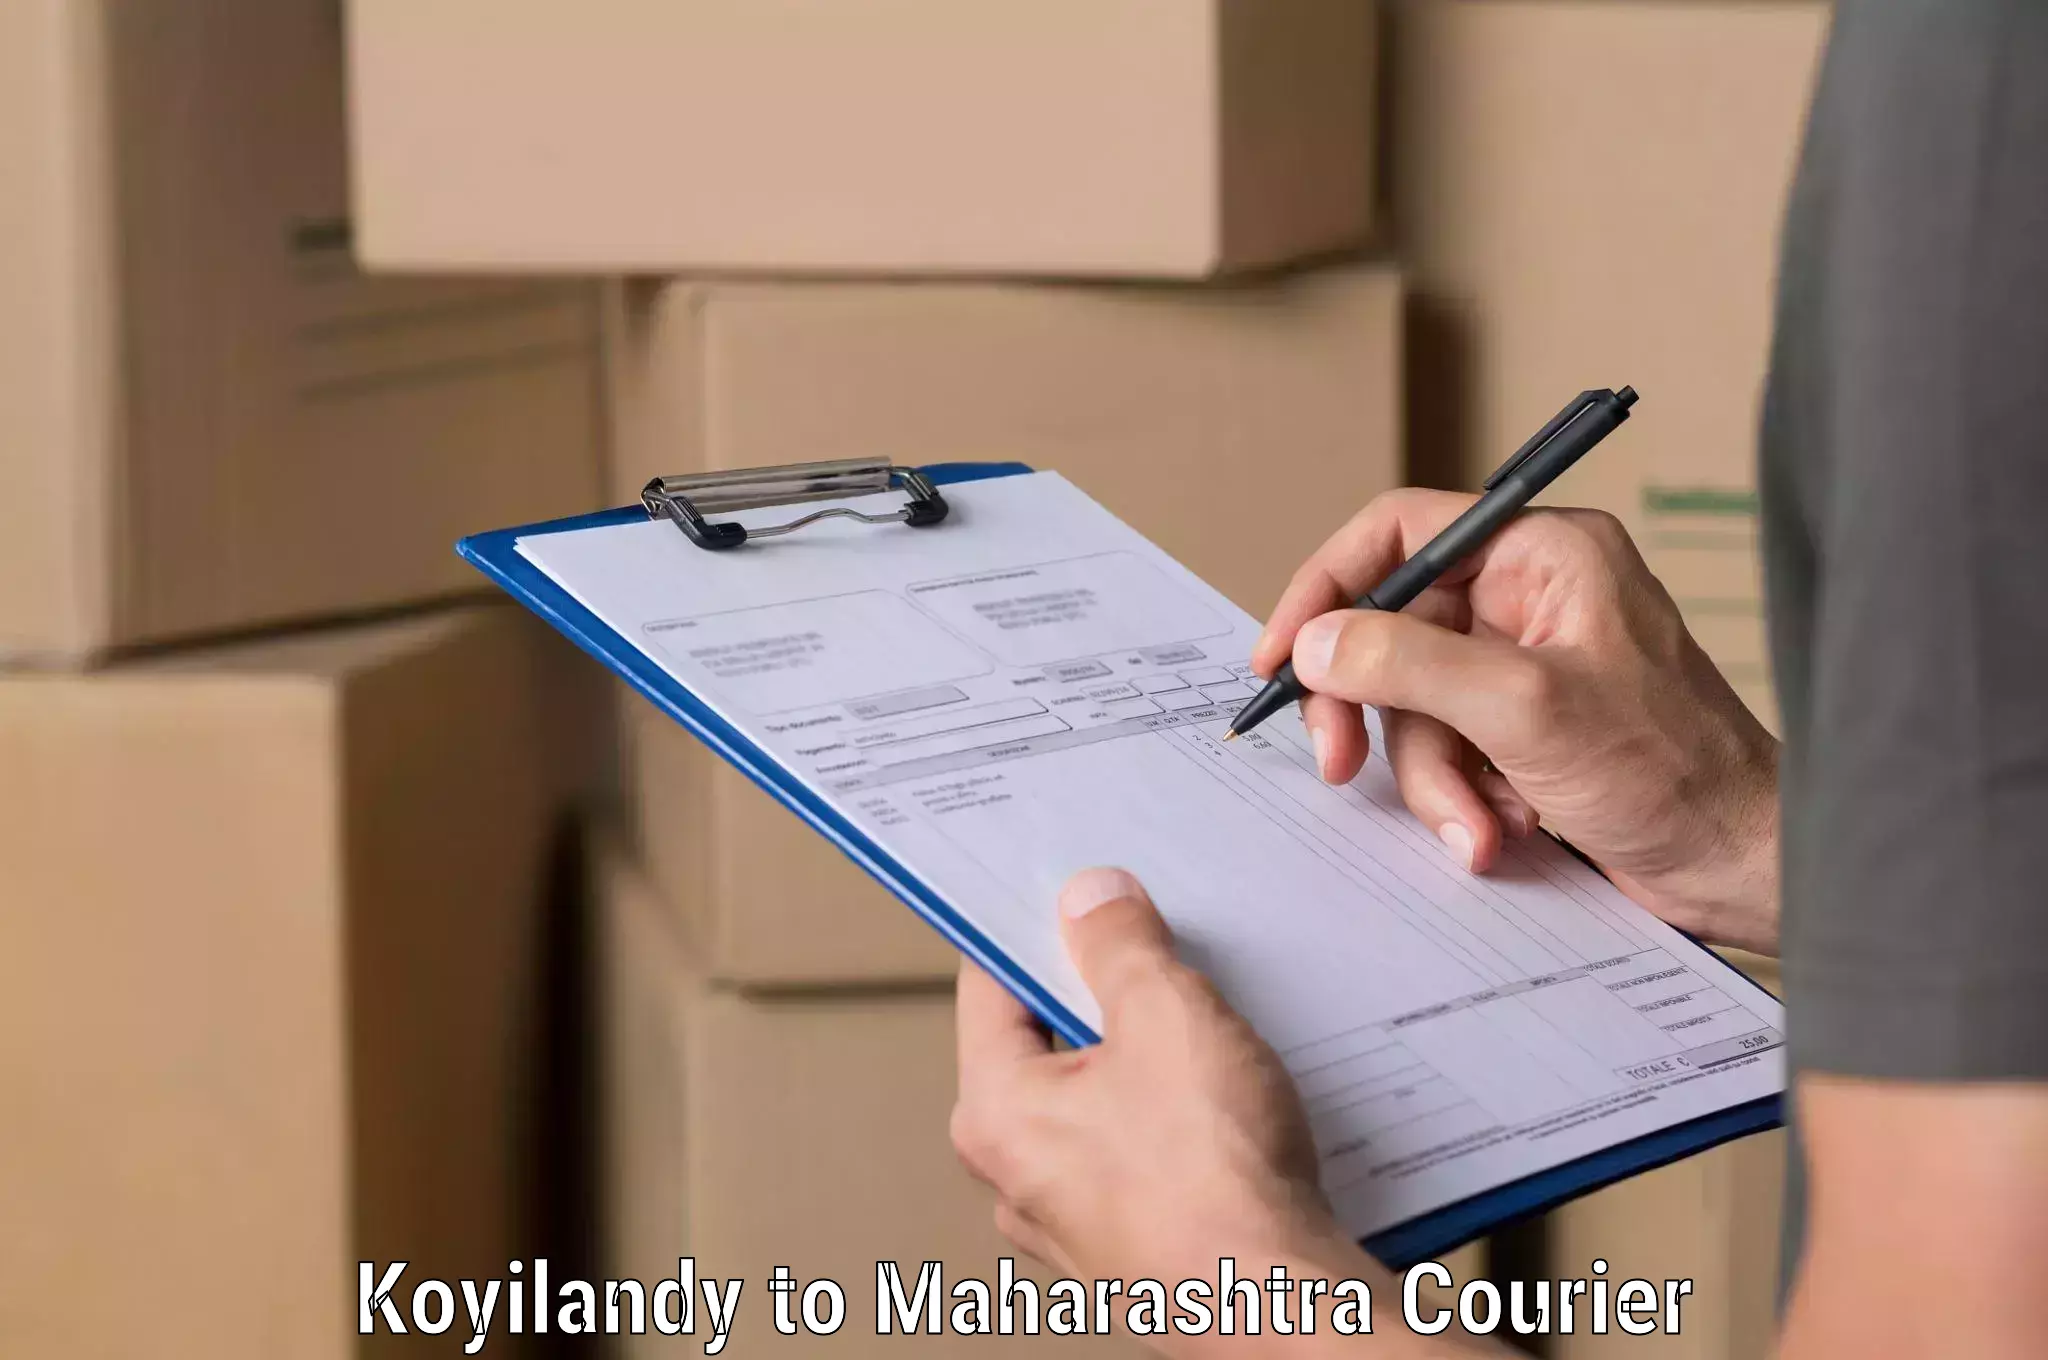 Express package delivery in Koyilandy to Pune